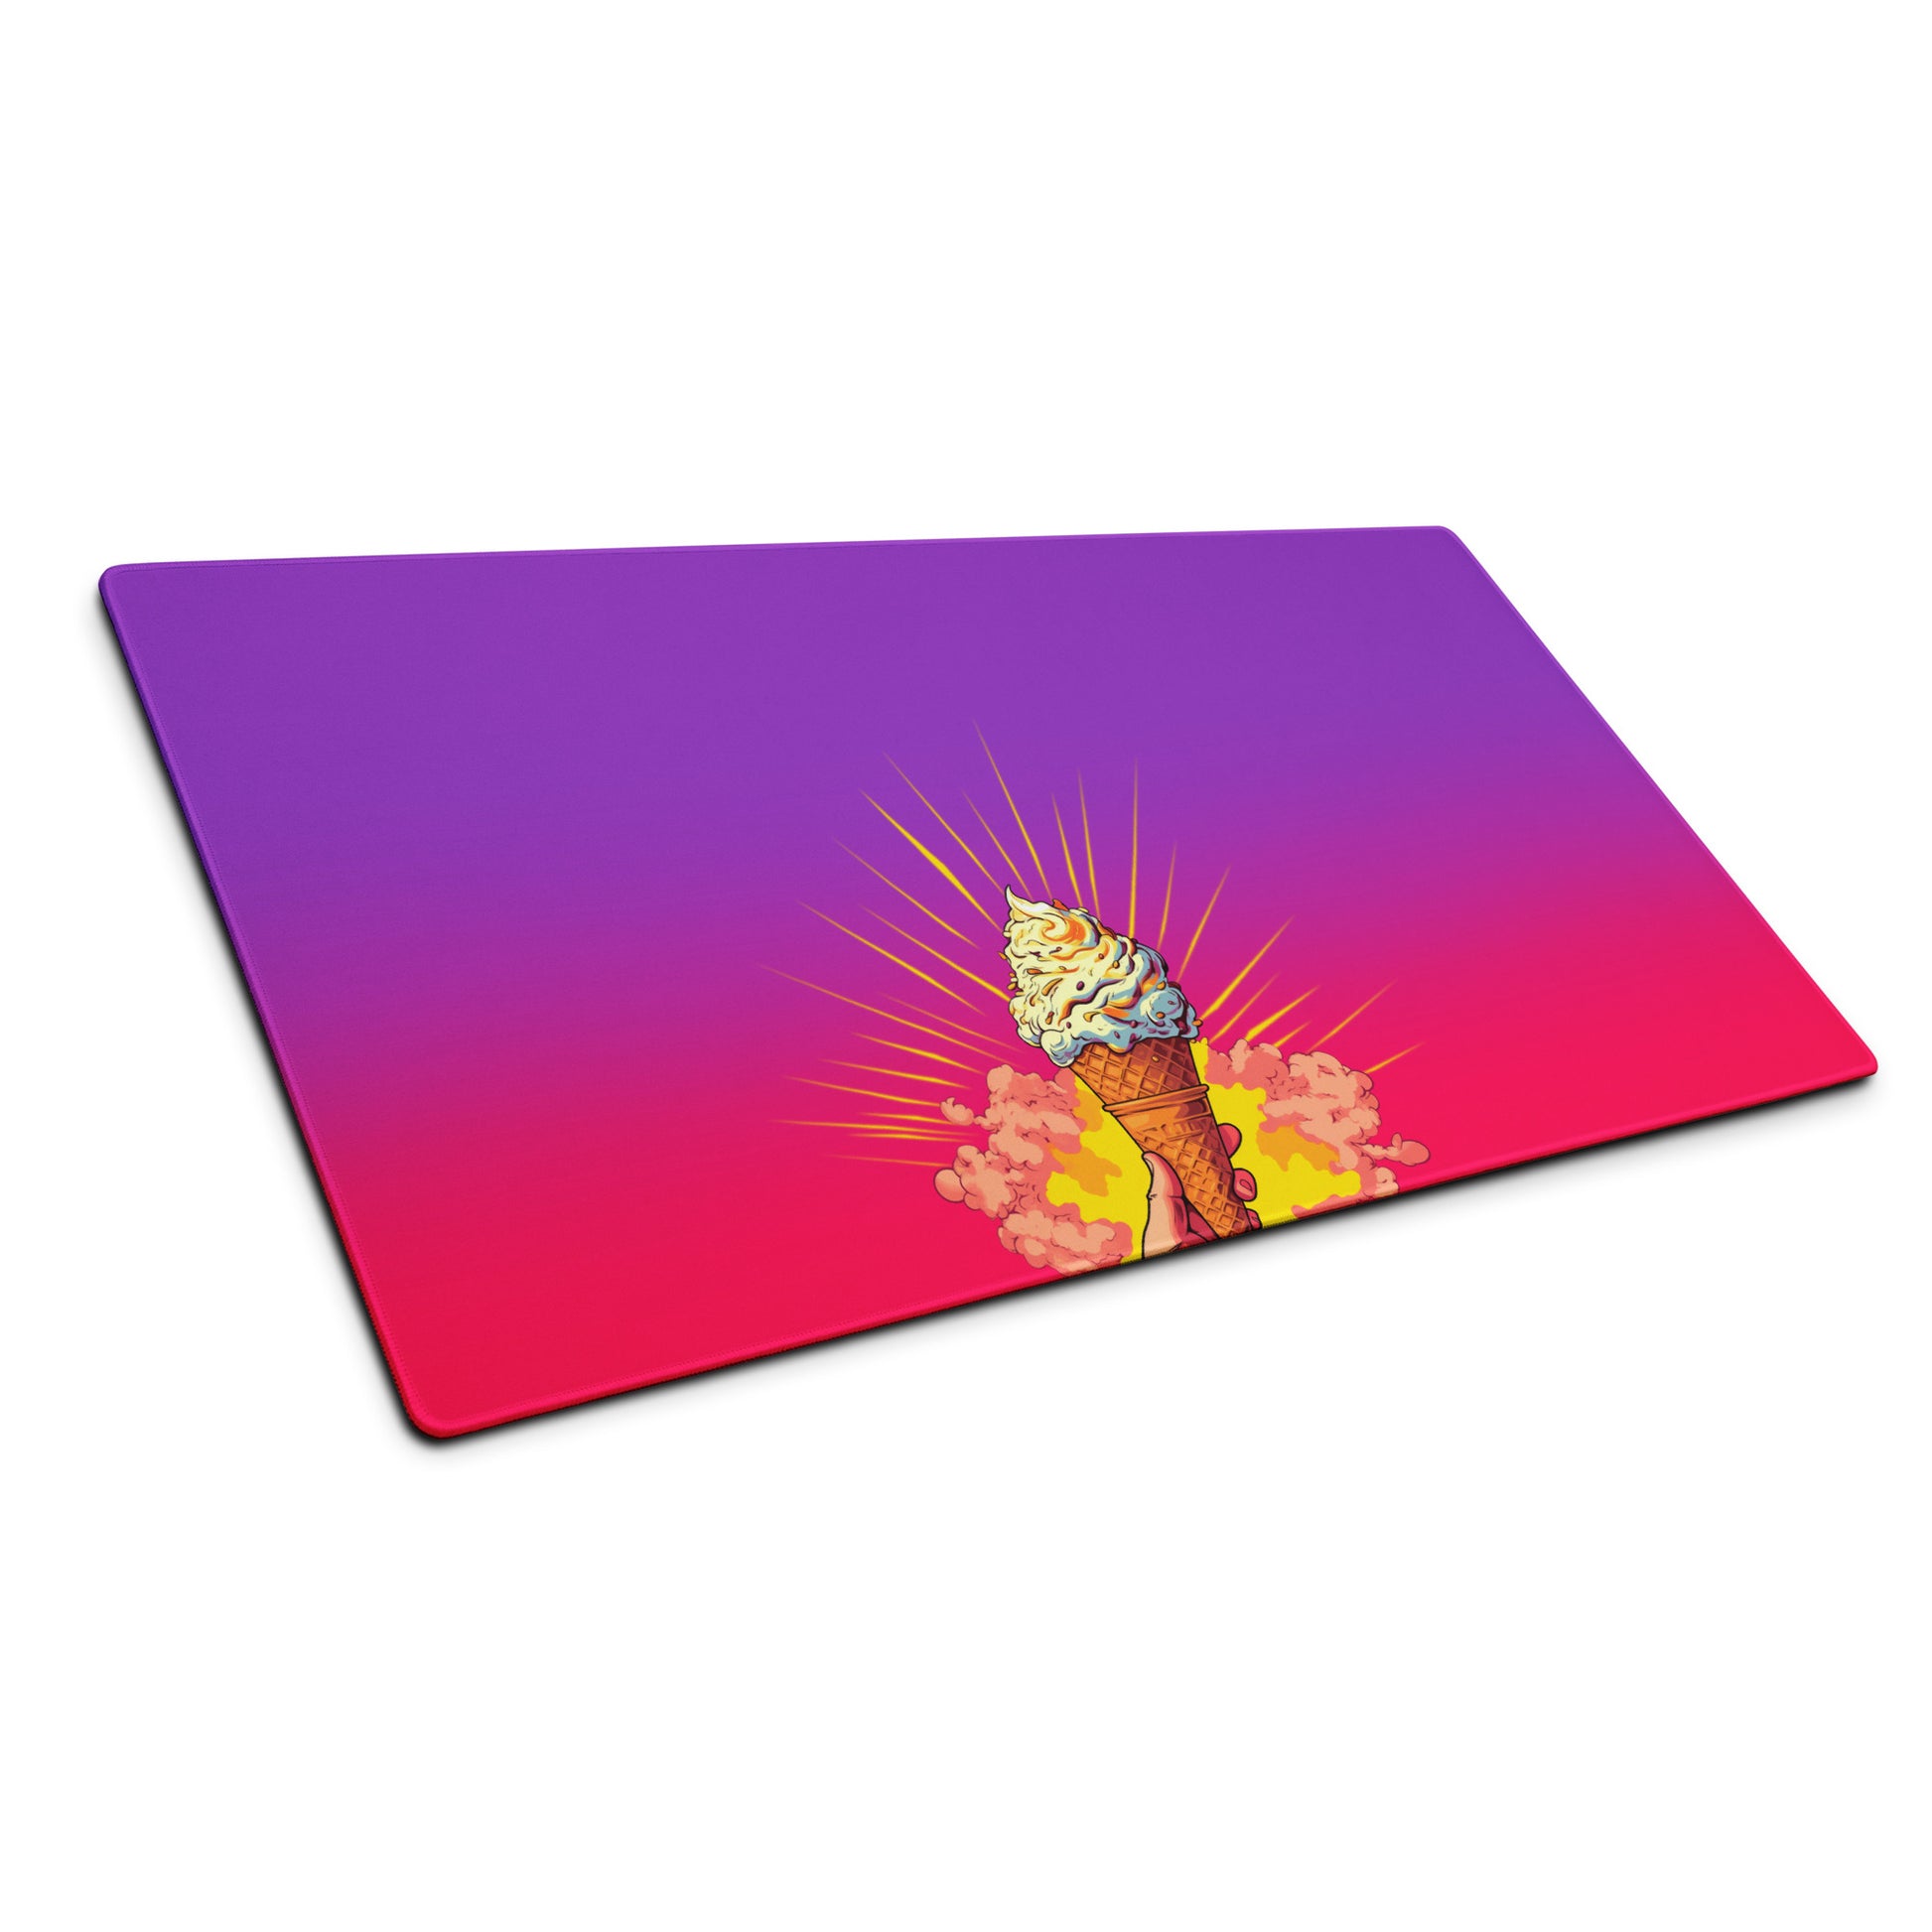 A 36" x 18" desk pad with a brightly colored ice cream cone in the middle of it shown at an angle. Pink and purple in color.